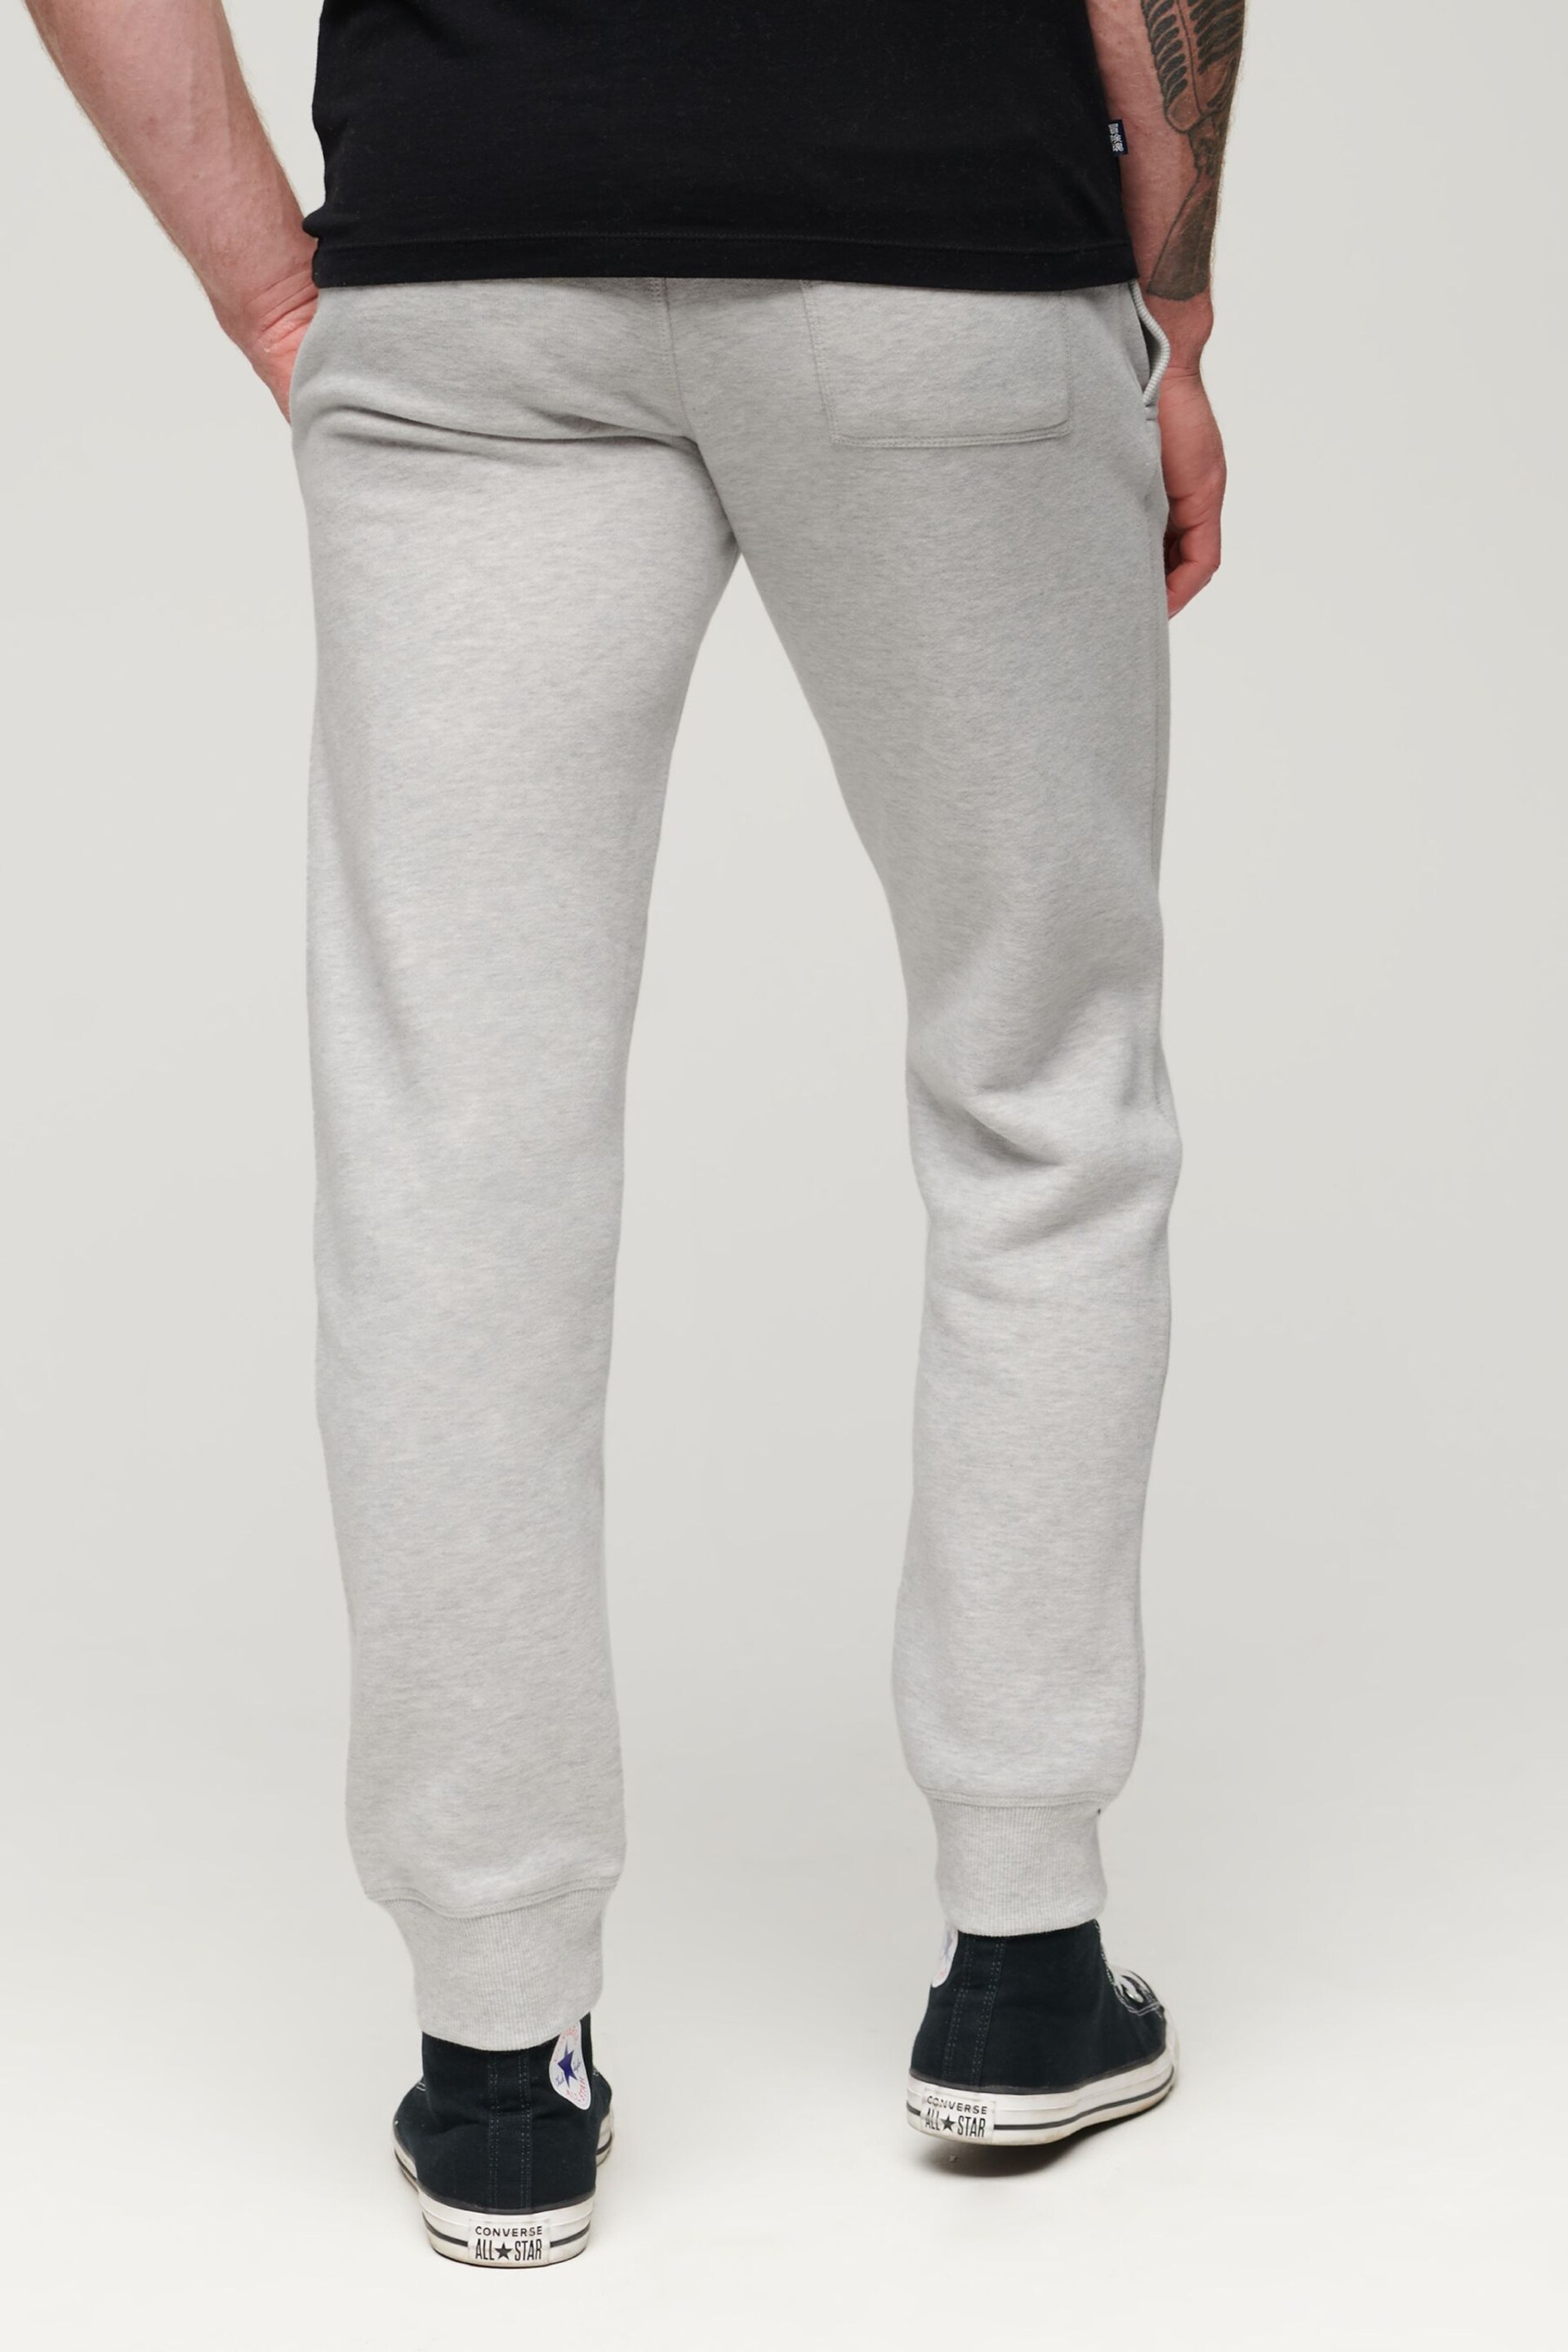 Superdry Natural Essential Logo Joggers - Image 2 of 6